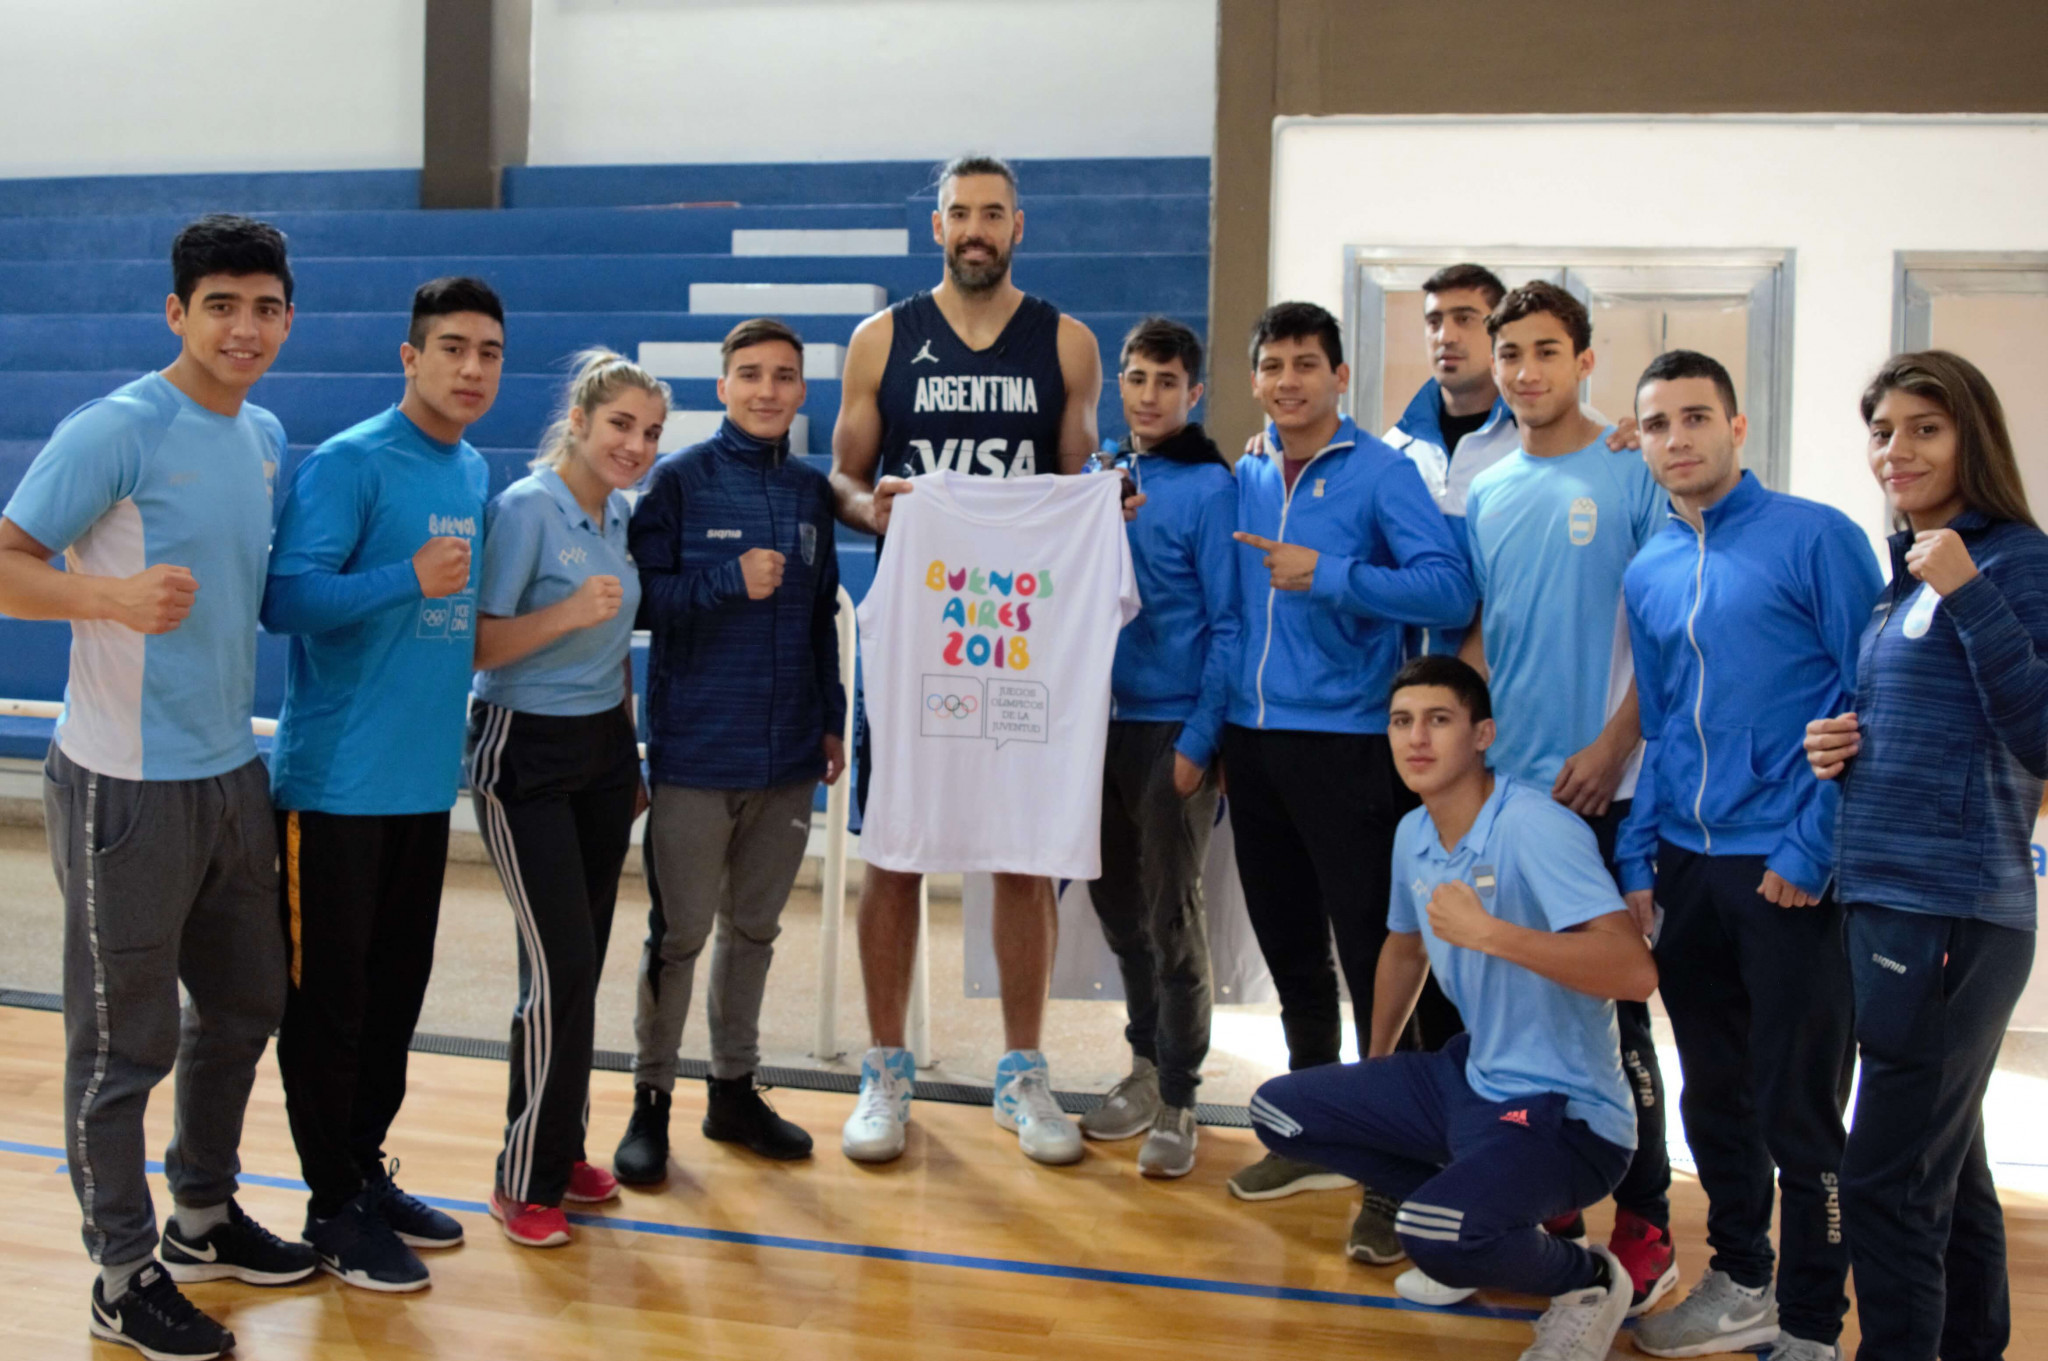 Buenos Aires 2018 boxing hopefuls receive special visit from Scola